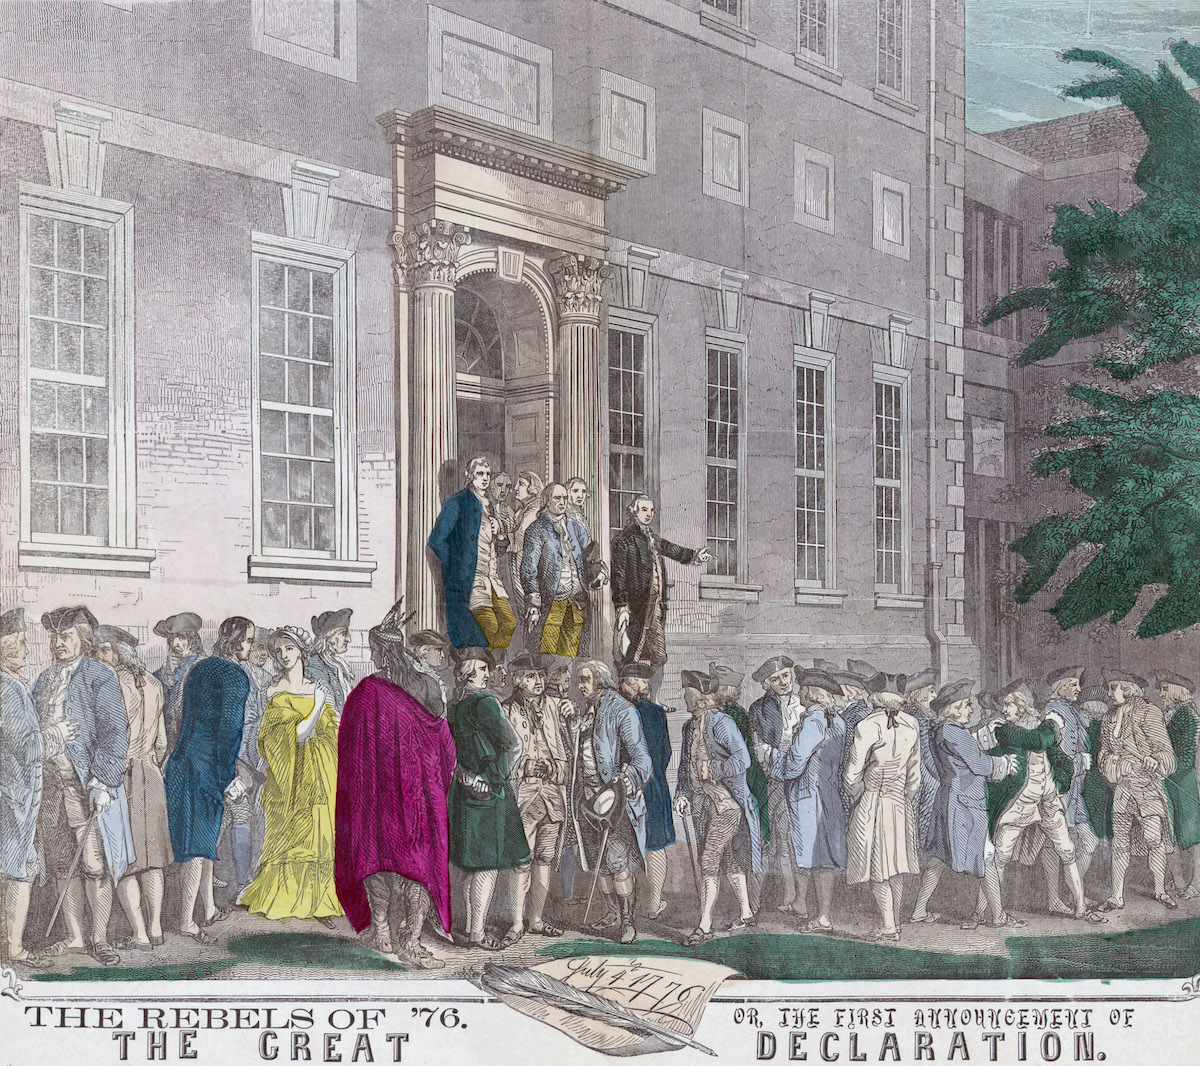 A 19th-century print shows members of the Second Continental Congress leaving Philadelphia's Independence Hall after adopting the Declaration of Independence from Great Britain. (Universal Images Group / Getty Images)